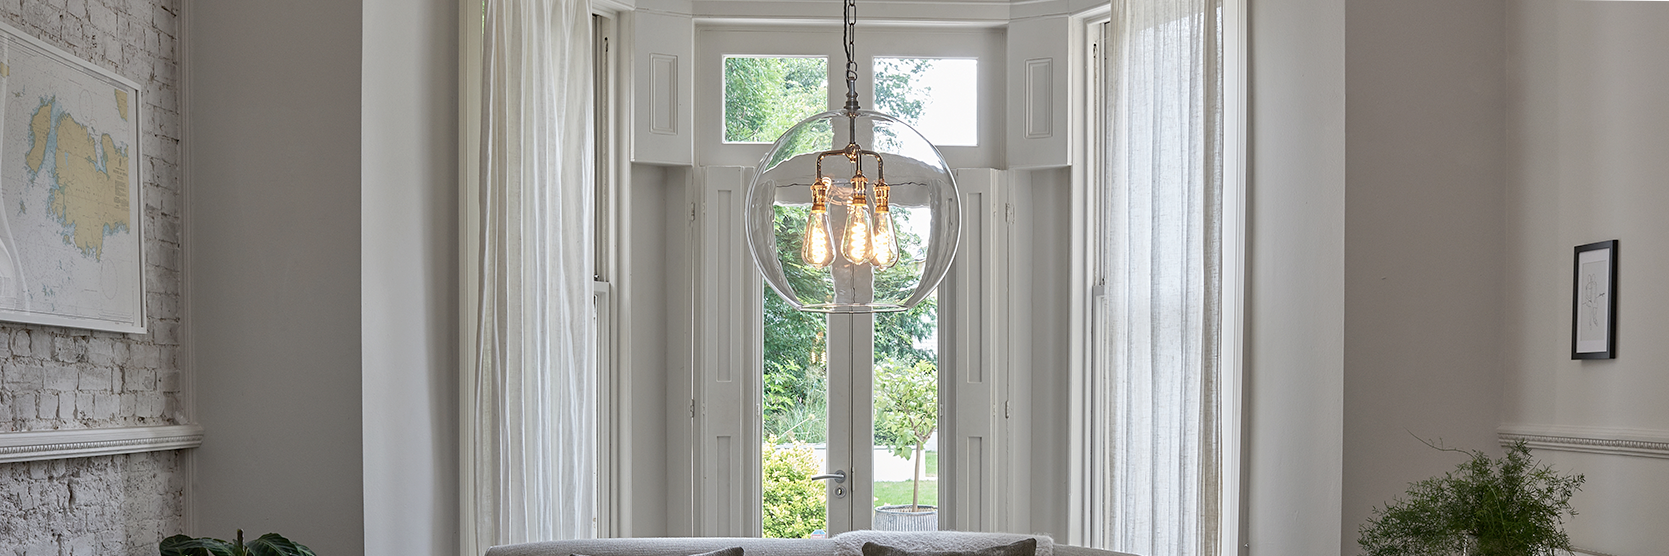 Clear glass globe pendant, modern elegance for any space.